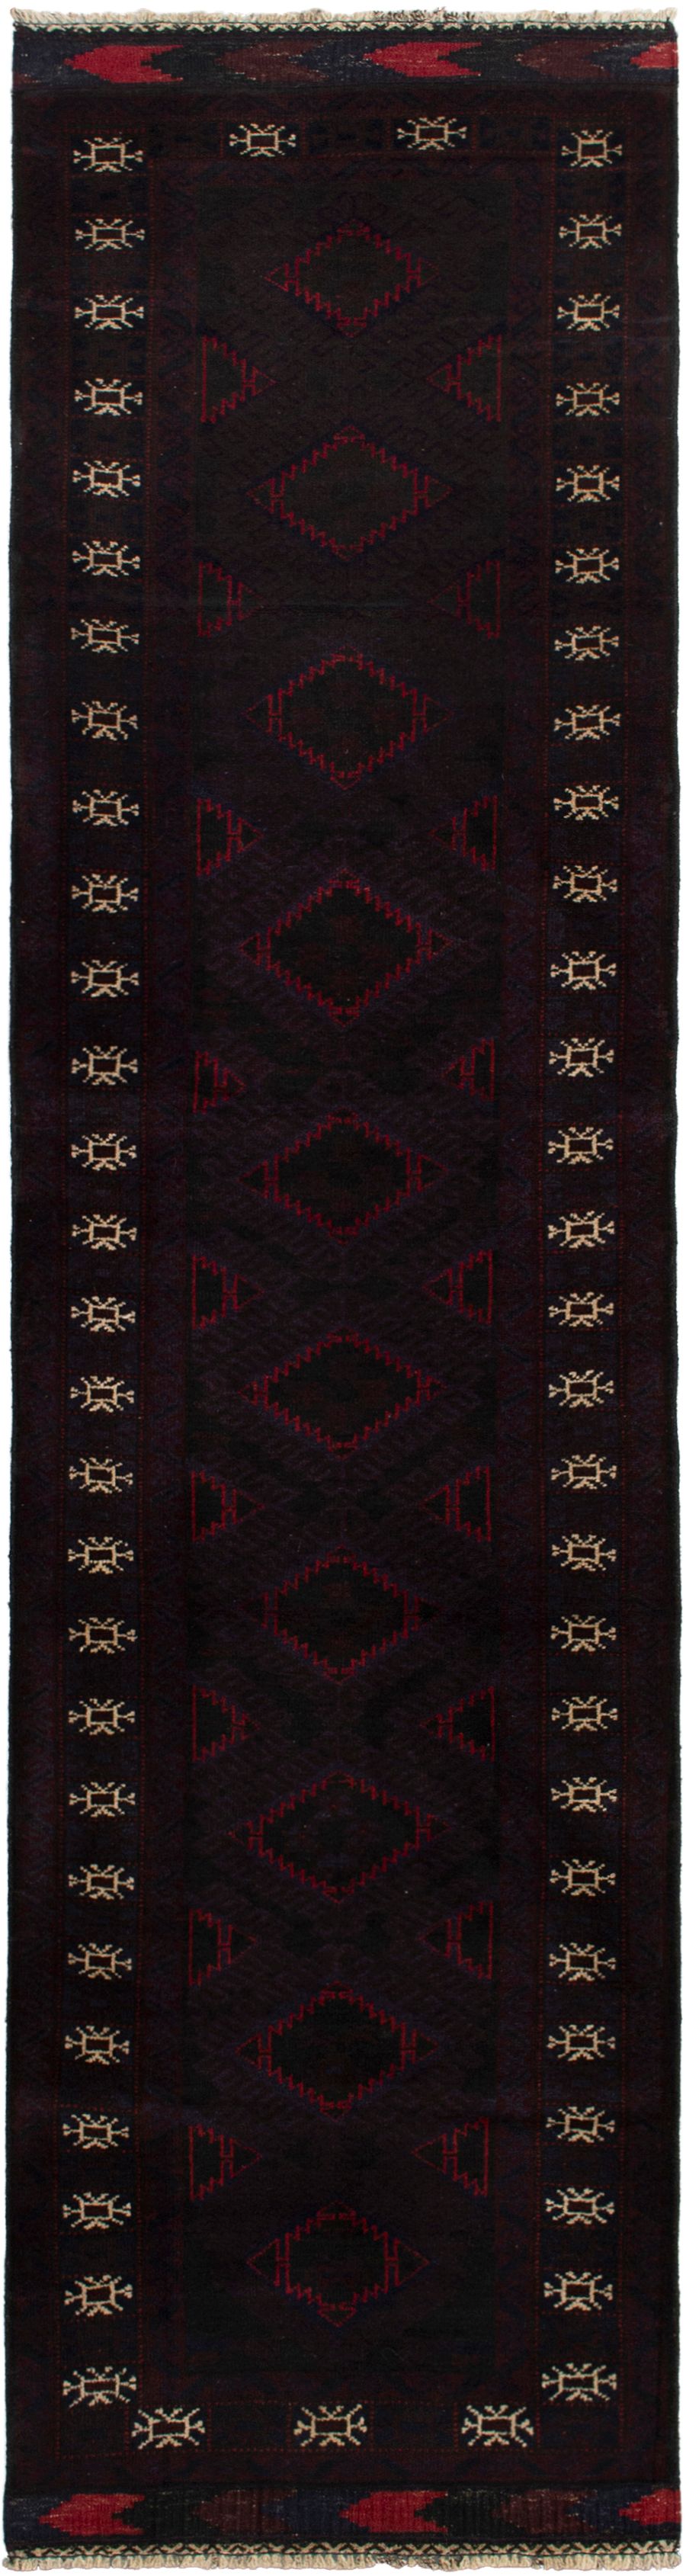 Hand-knotted Finest Rizbaft Dark Red Wool Rug 2'6" x 9'6" Size: 2'6" x 9'6"  